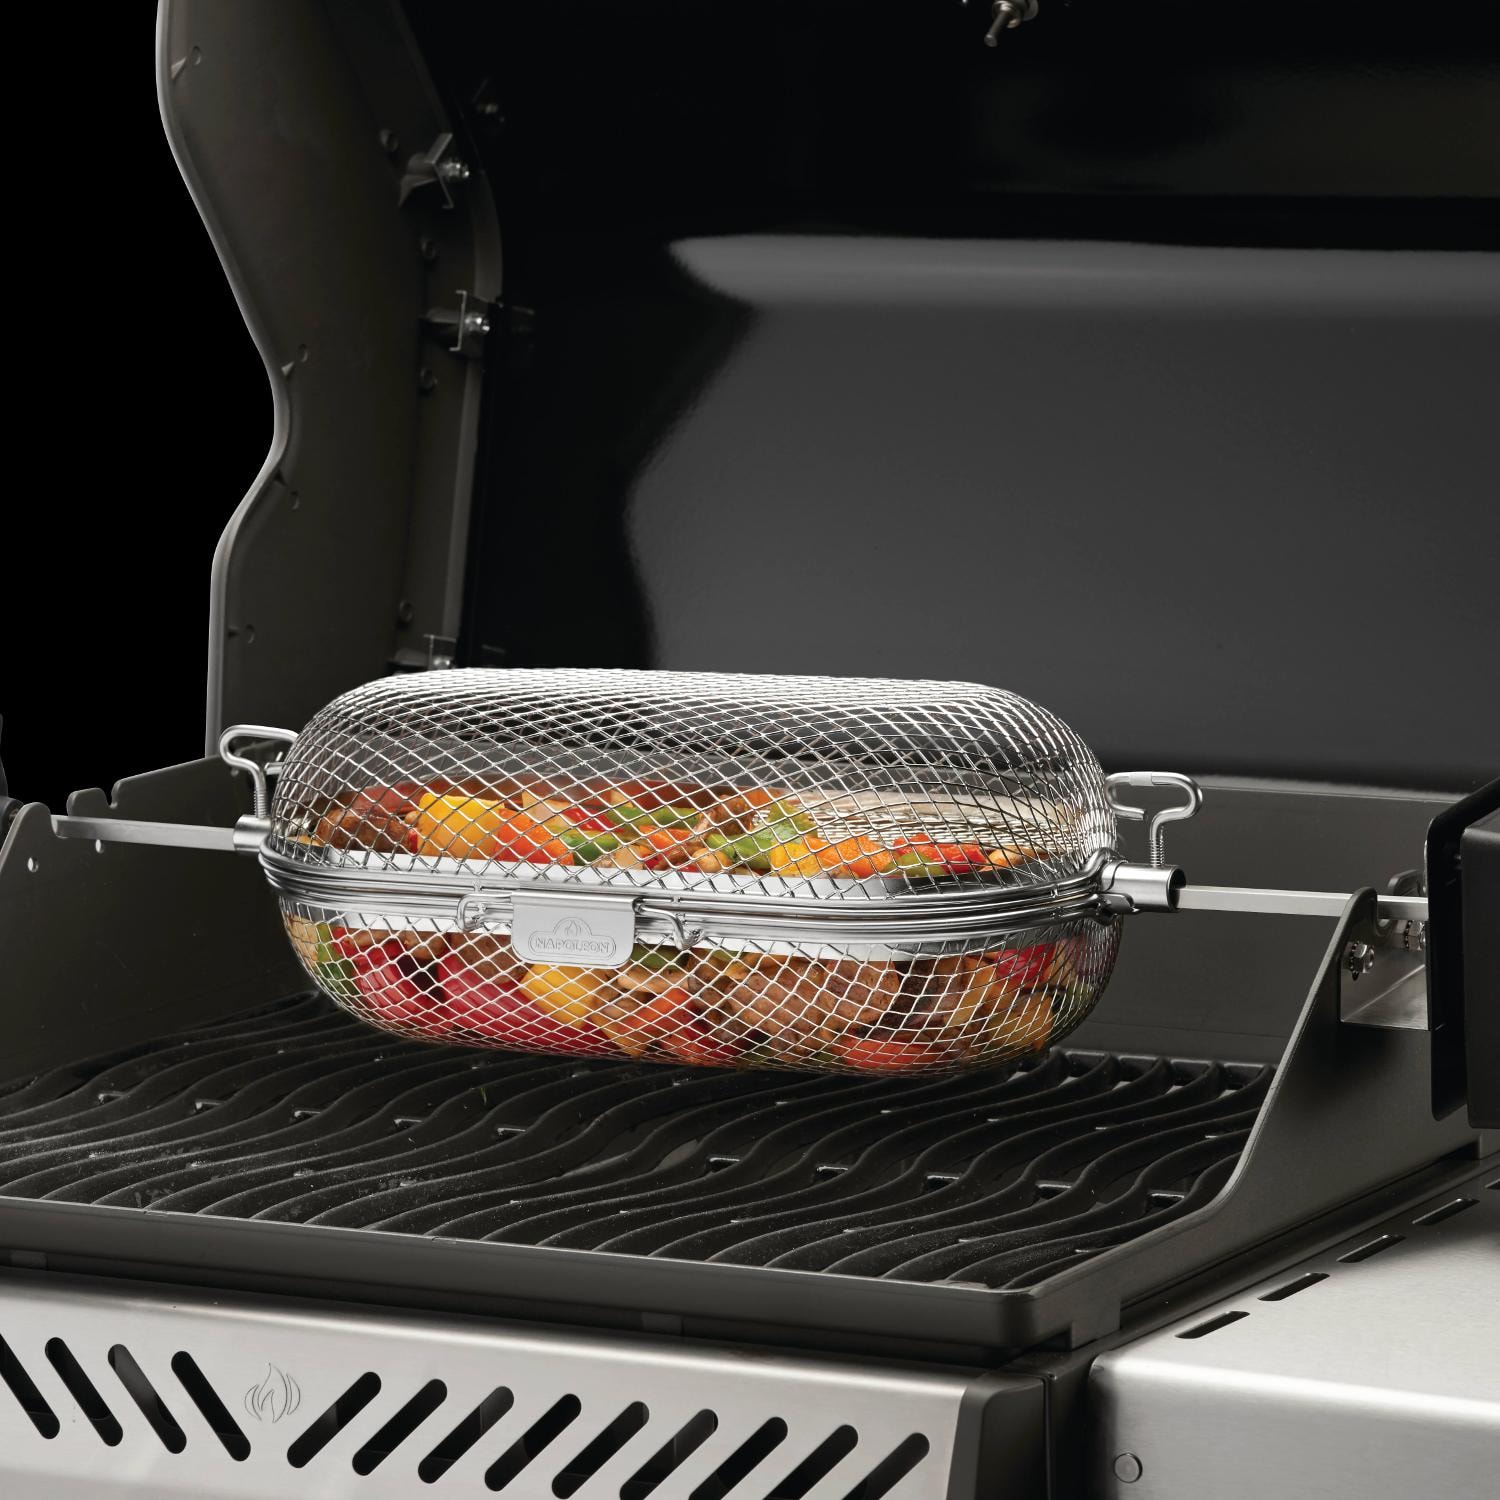 Napoleon Products WS-64000 Food Grade Stainless Steel Rotisserie Grill Basket - image 1 of 3